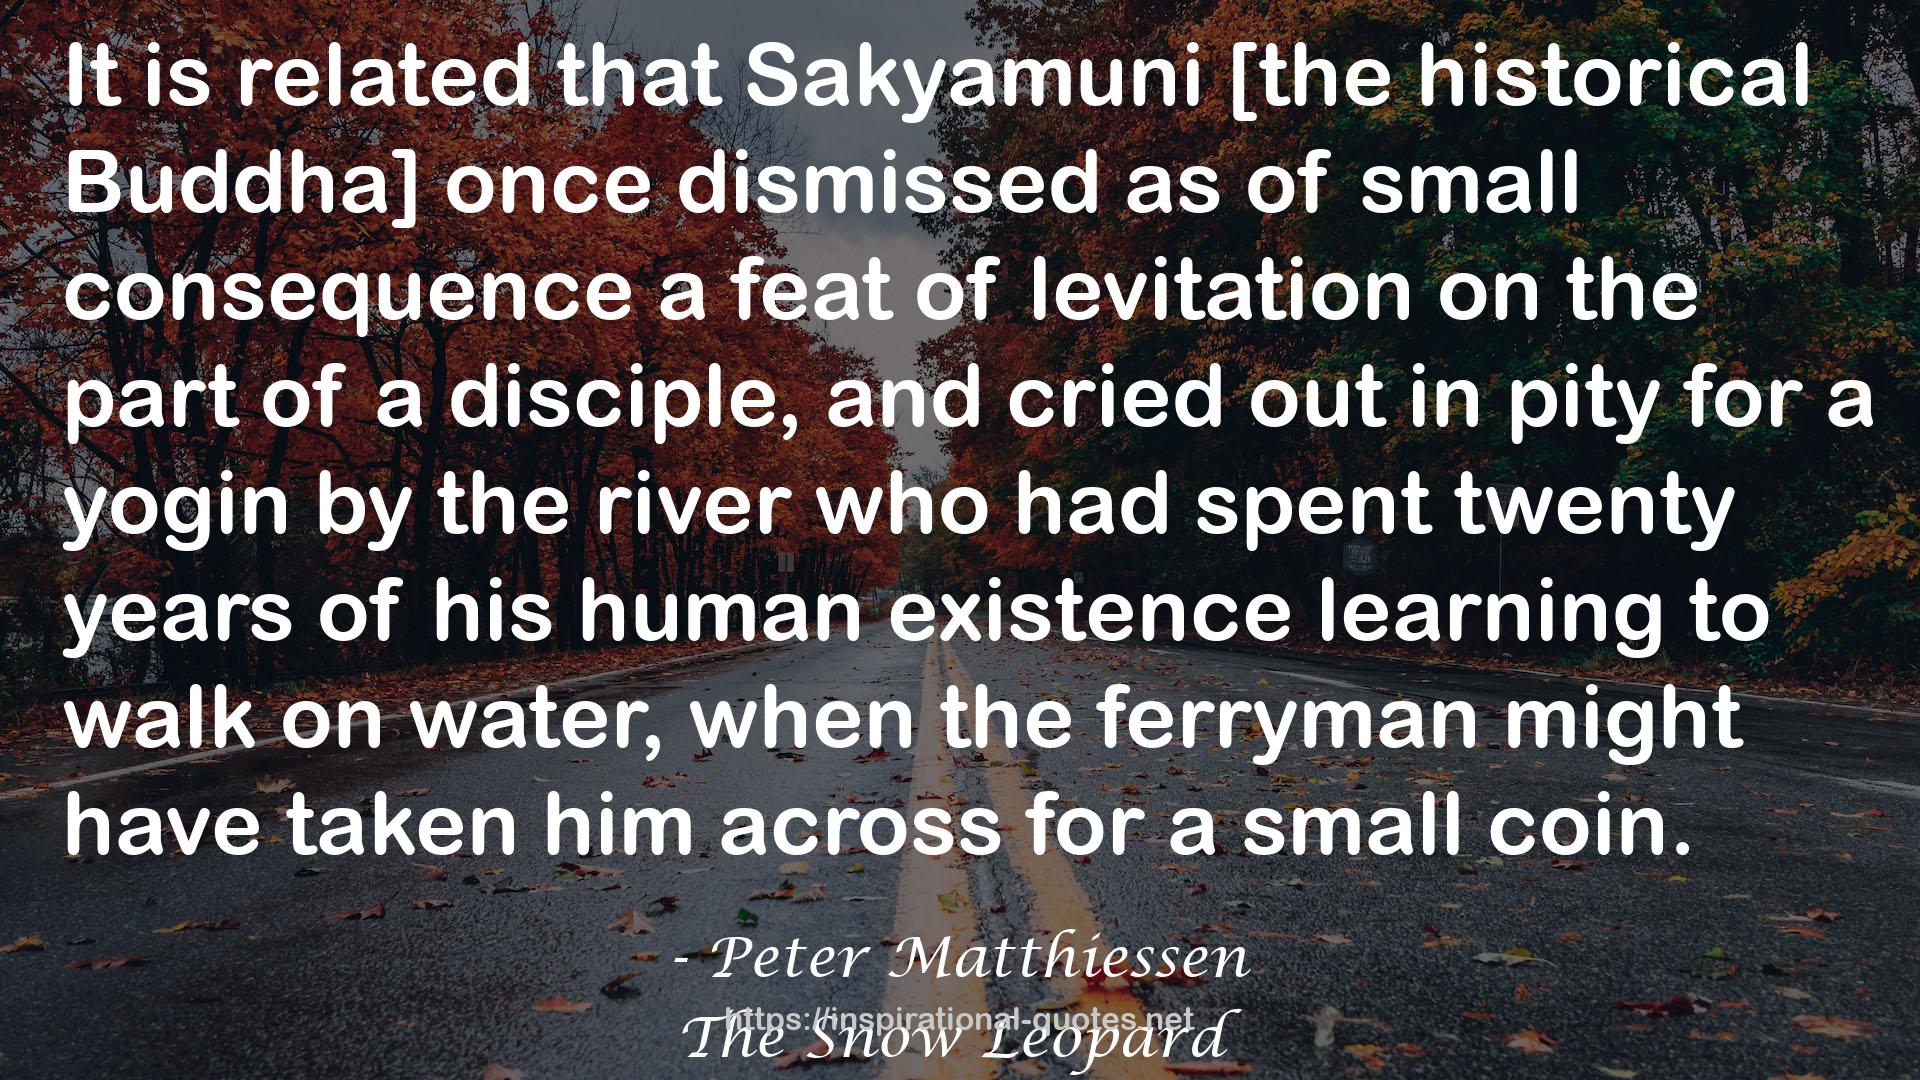 the ferryman  QUOTES